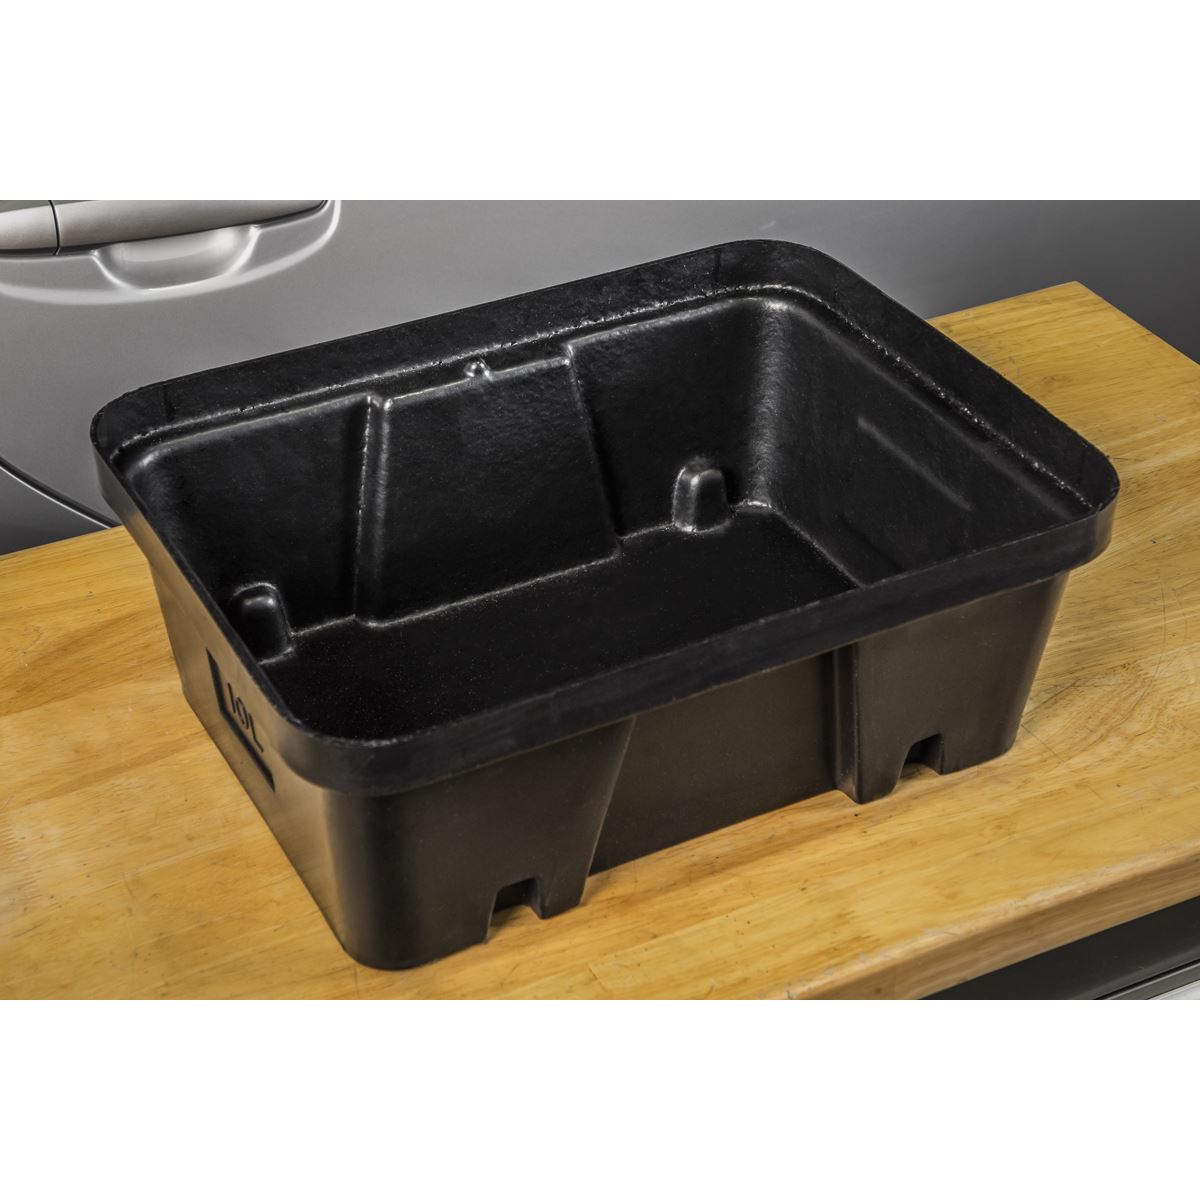 Sealey Spill Tray with Platform 10L